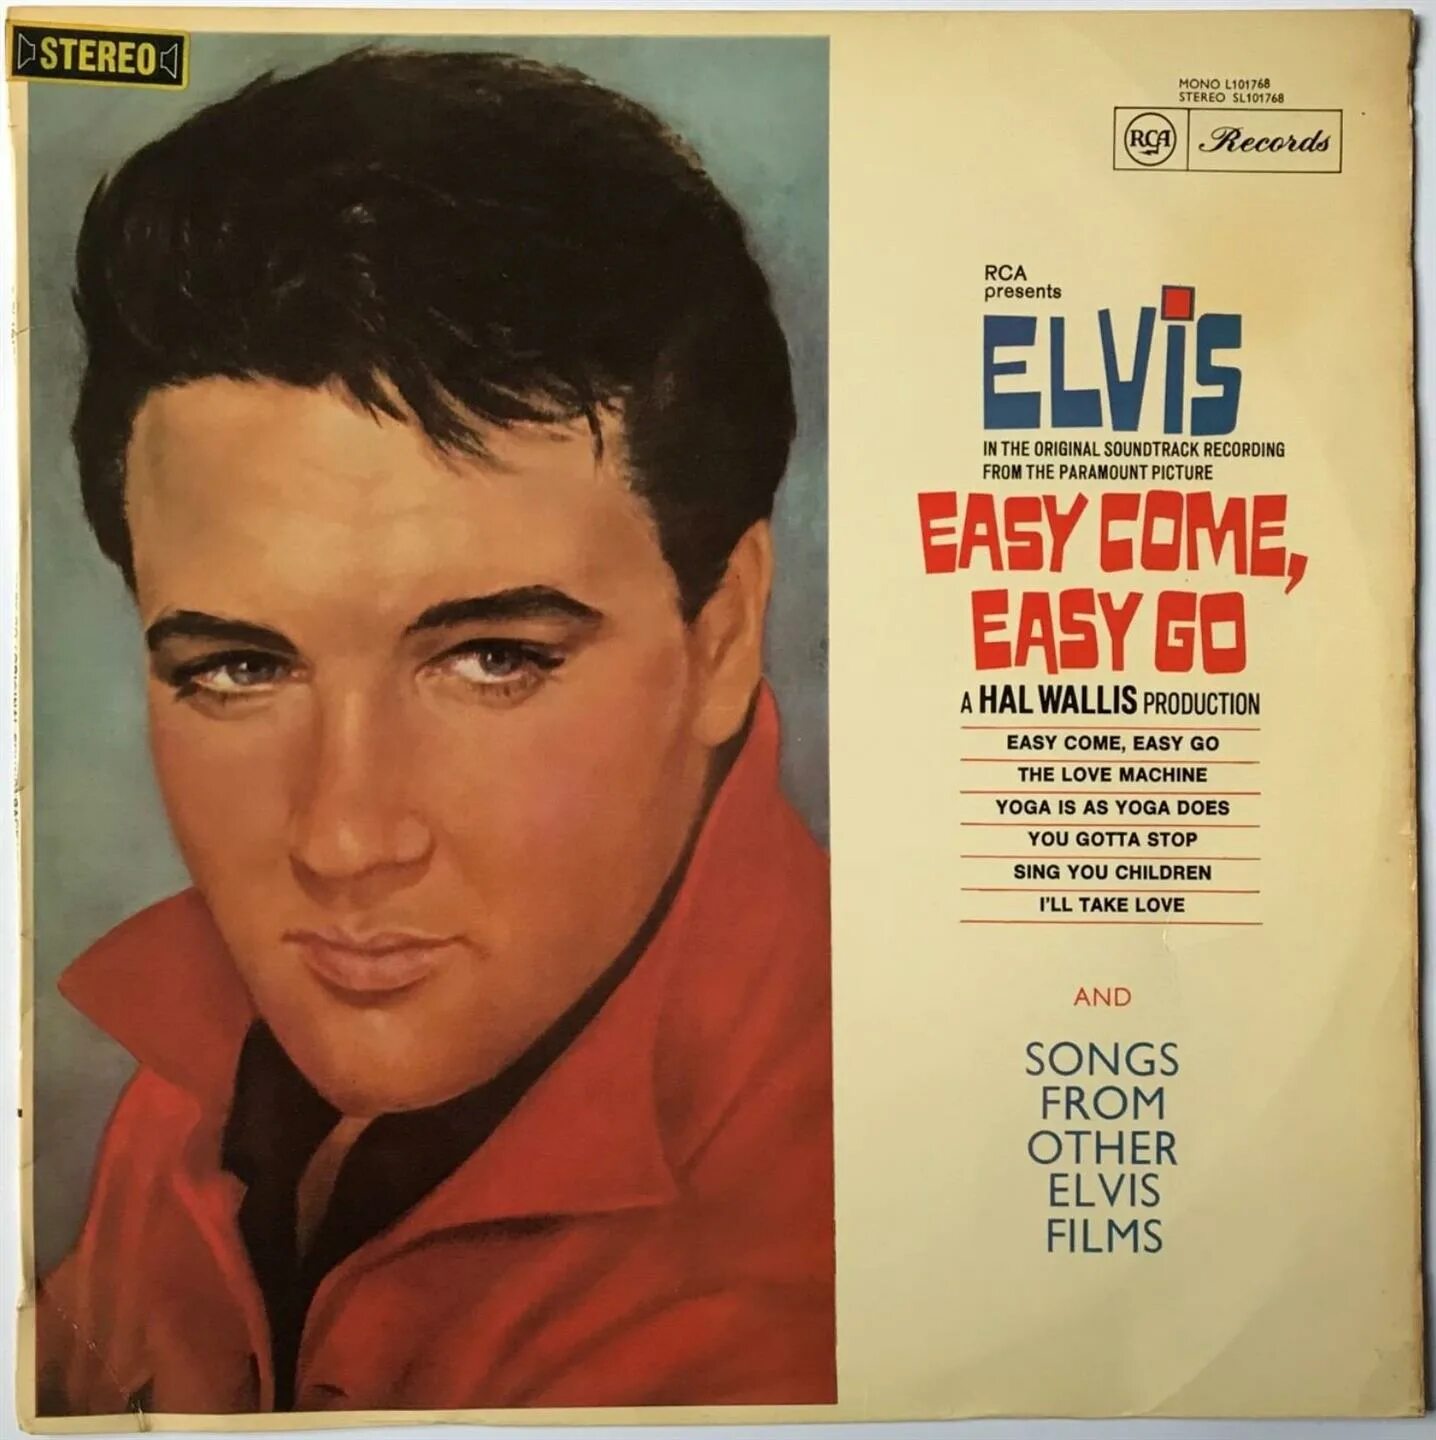 Easy coming easy coming песня. Easy come, easy go (Elvis Presley Song). Easy come, easy go 1976. Easy coming easy going.